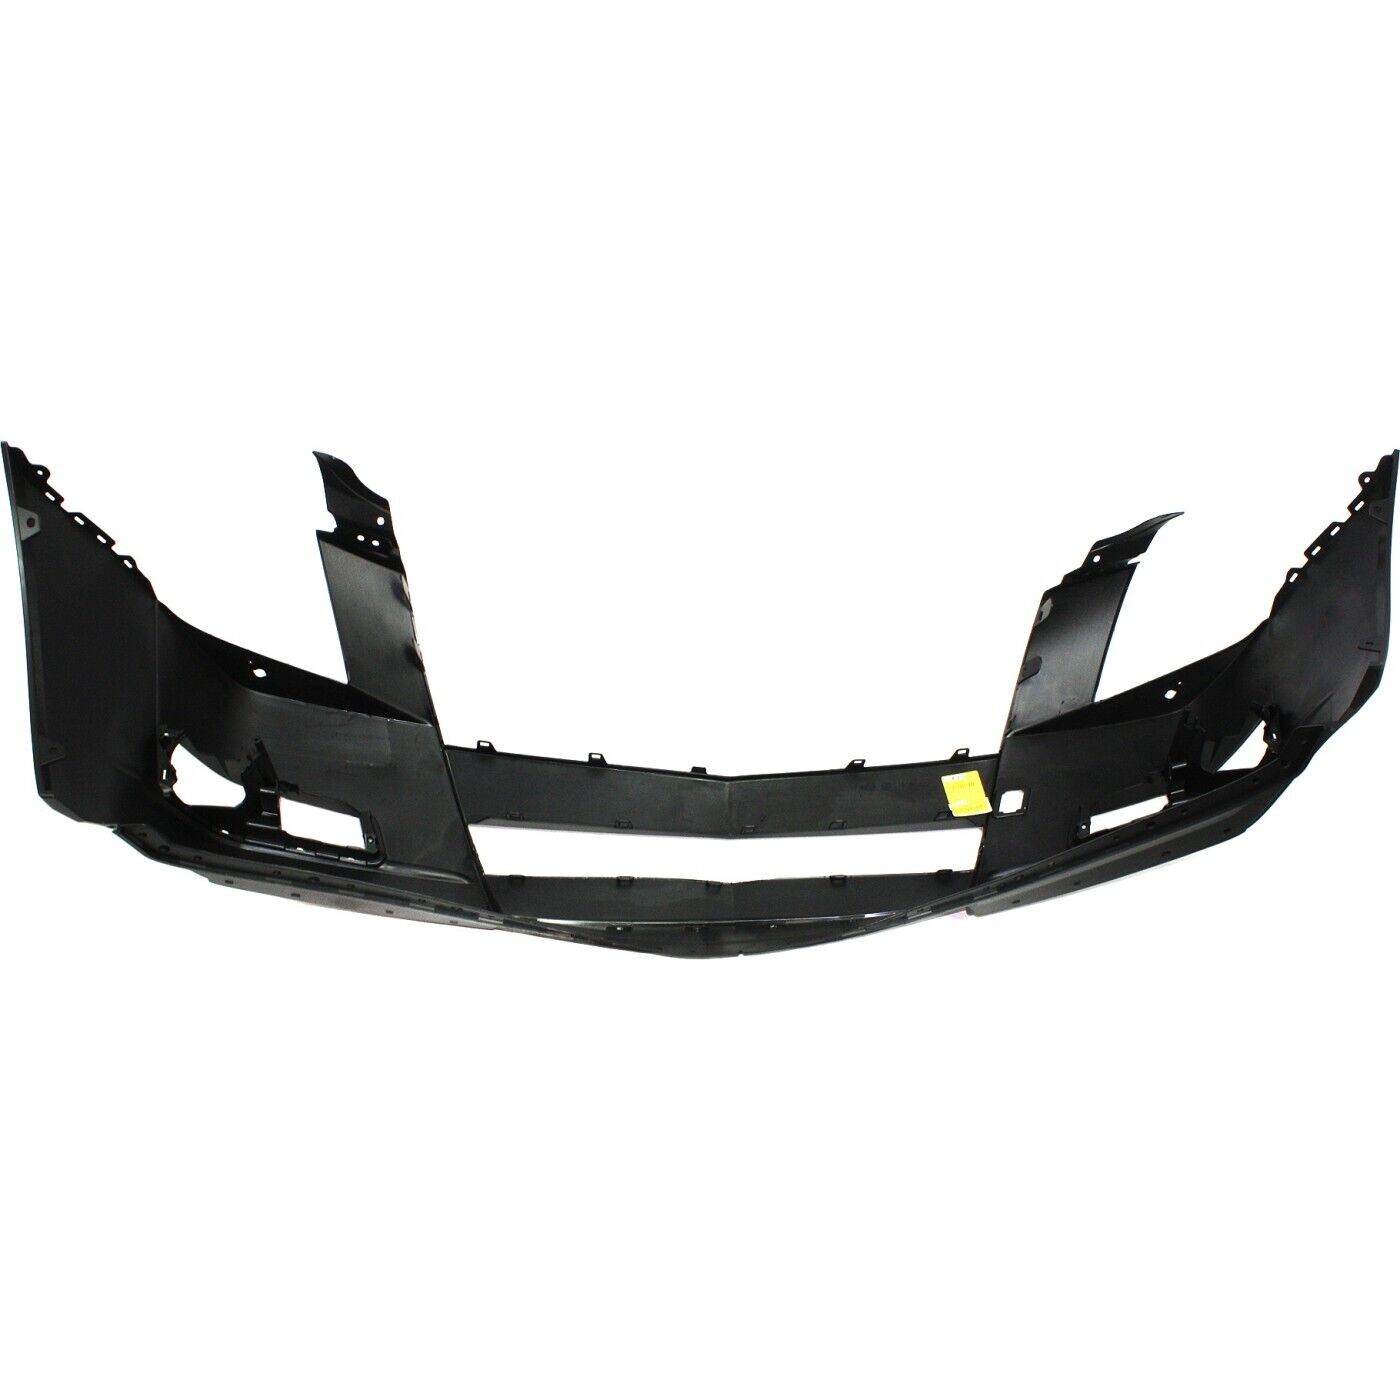 Cadillac CTS 2008 - 2014 Front Bumper Cover 08 - 14 GM1000856 Bumper-King